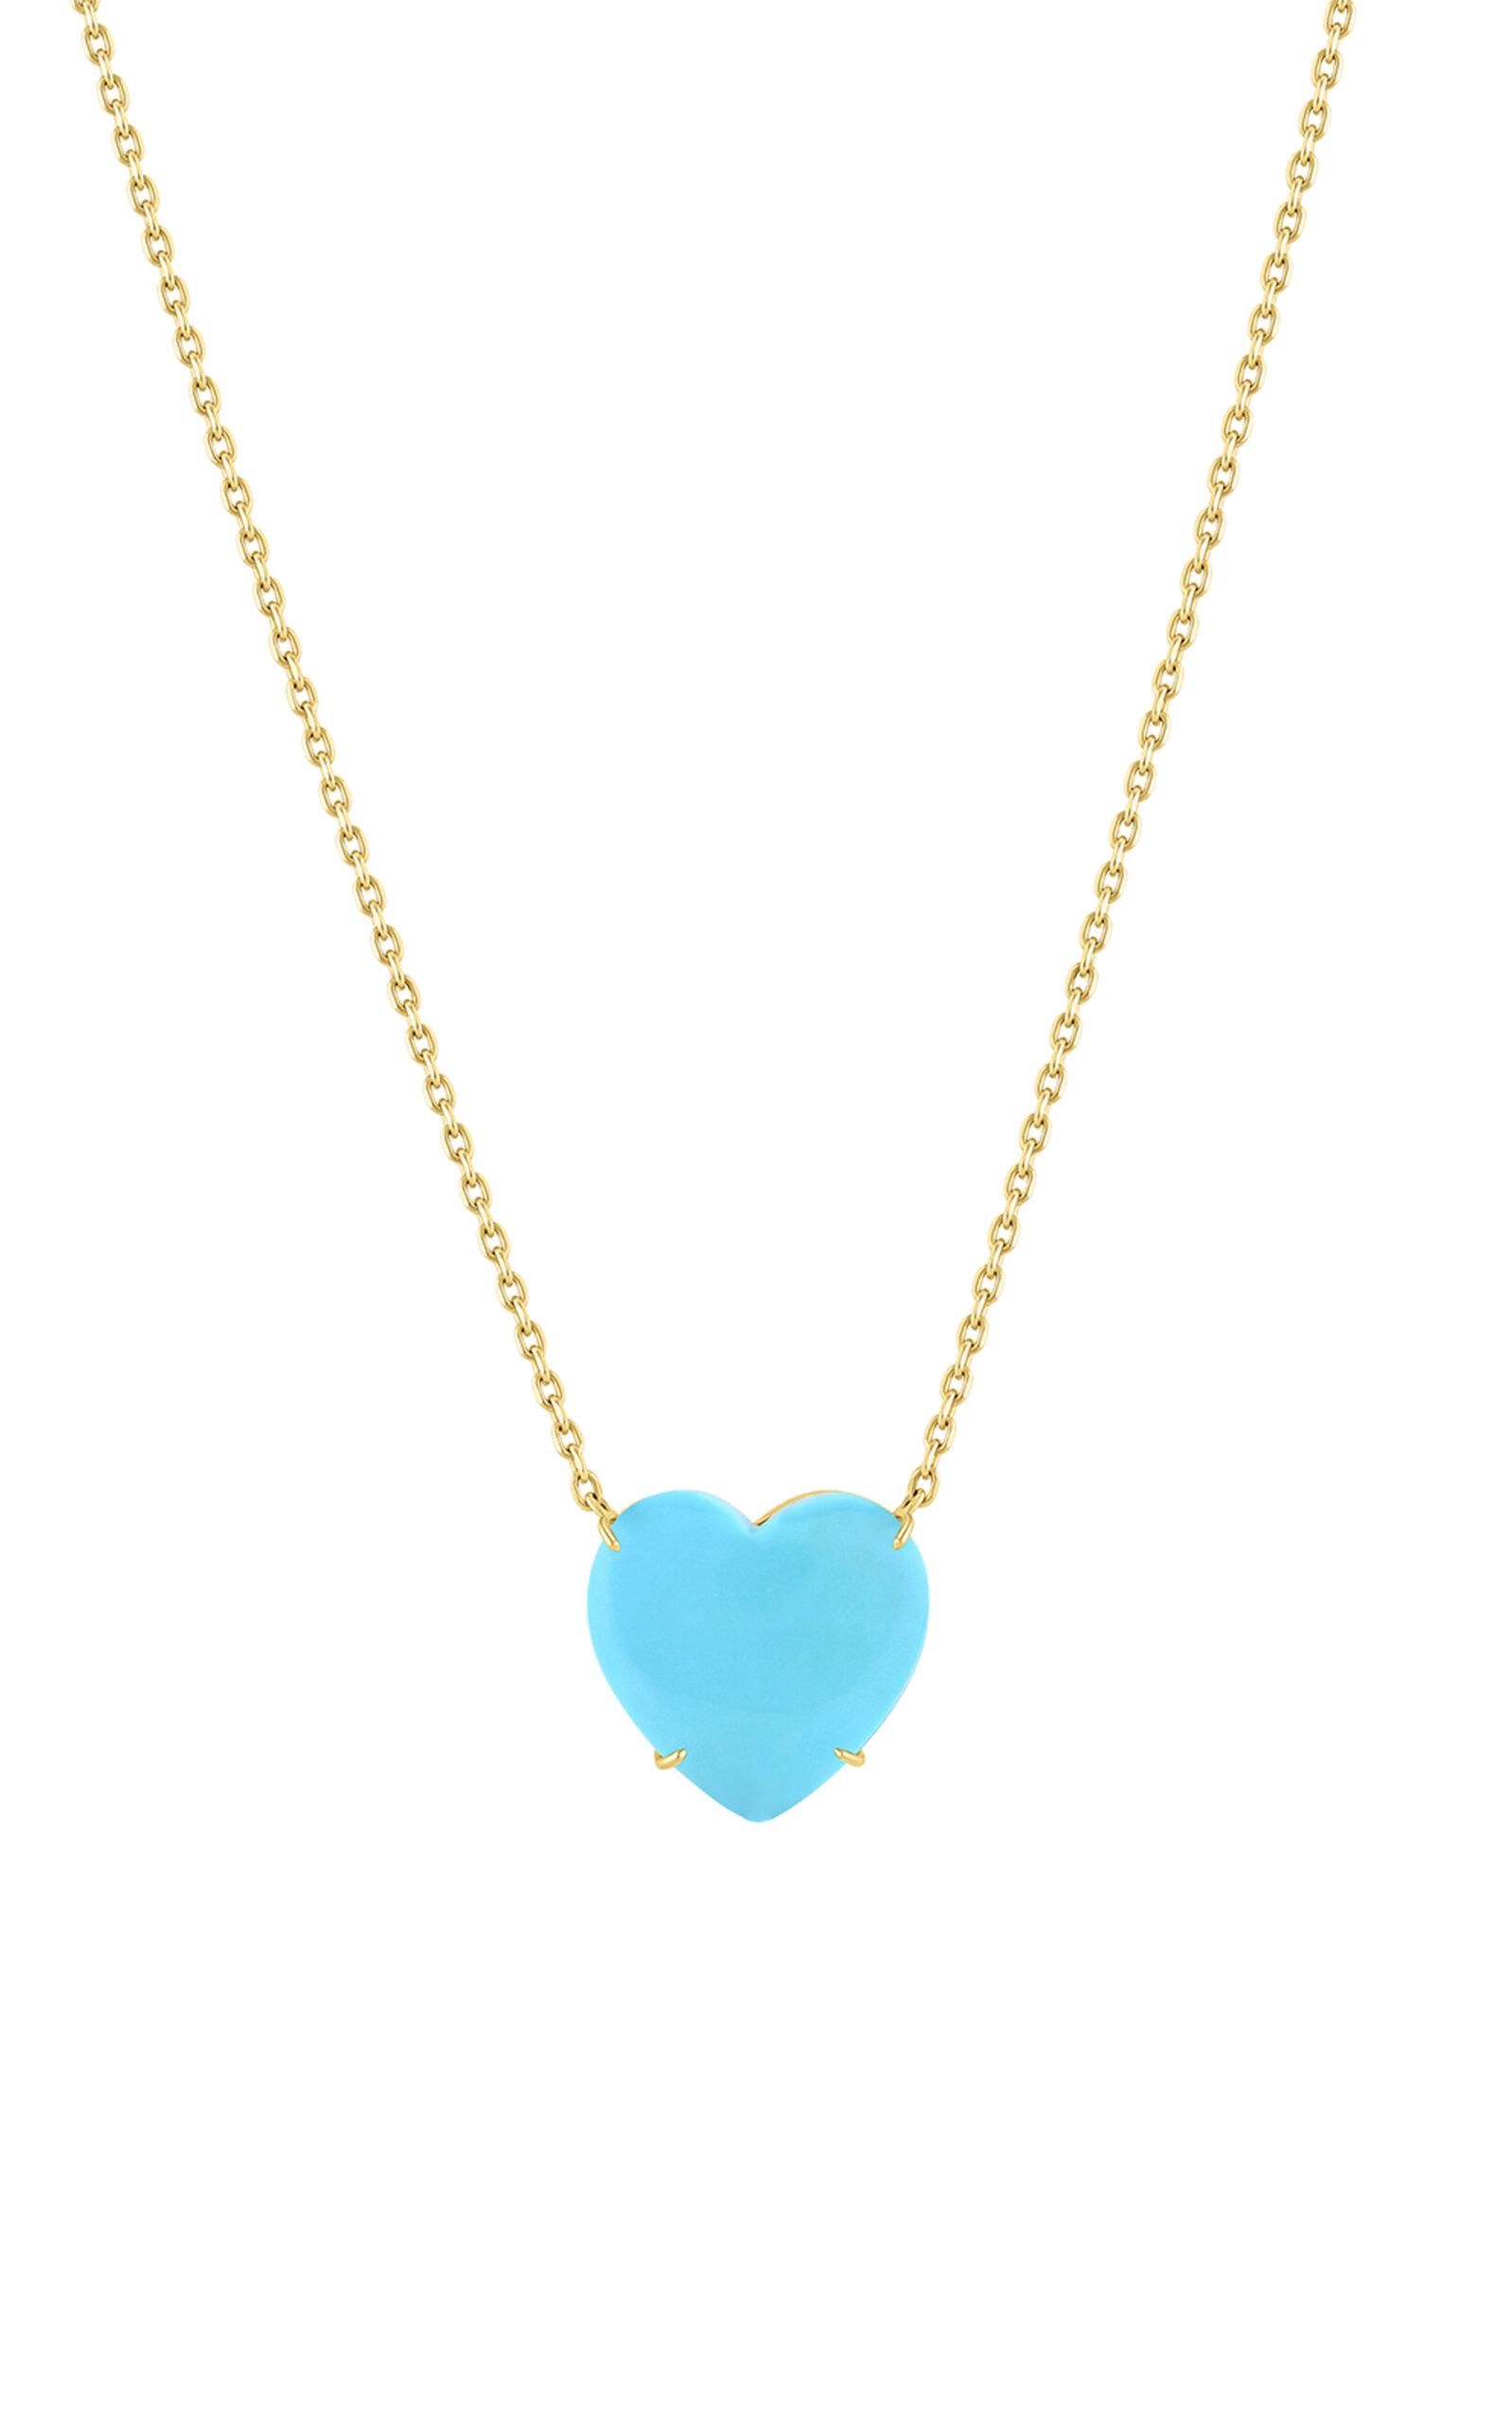 M.spalten Women's The Single Heart Lady 14k Yellow Gold Turquoise Necklace In Blue